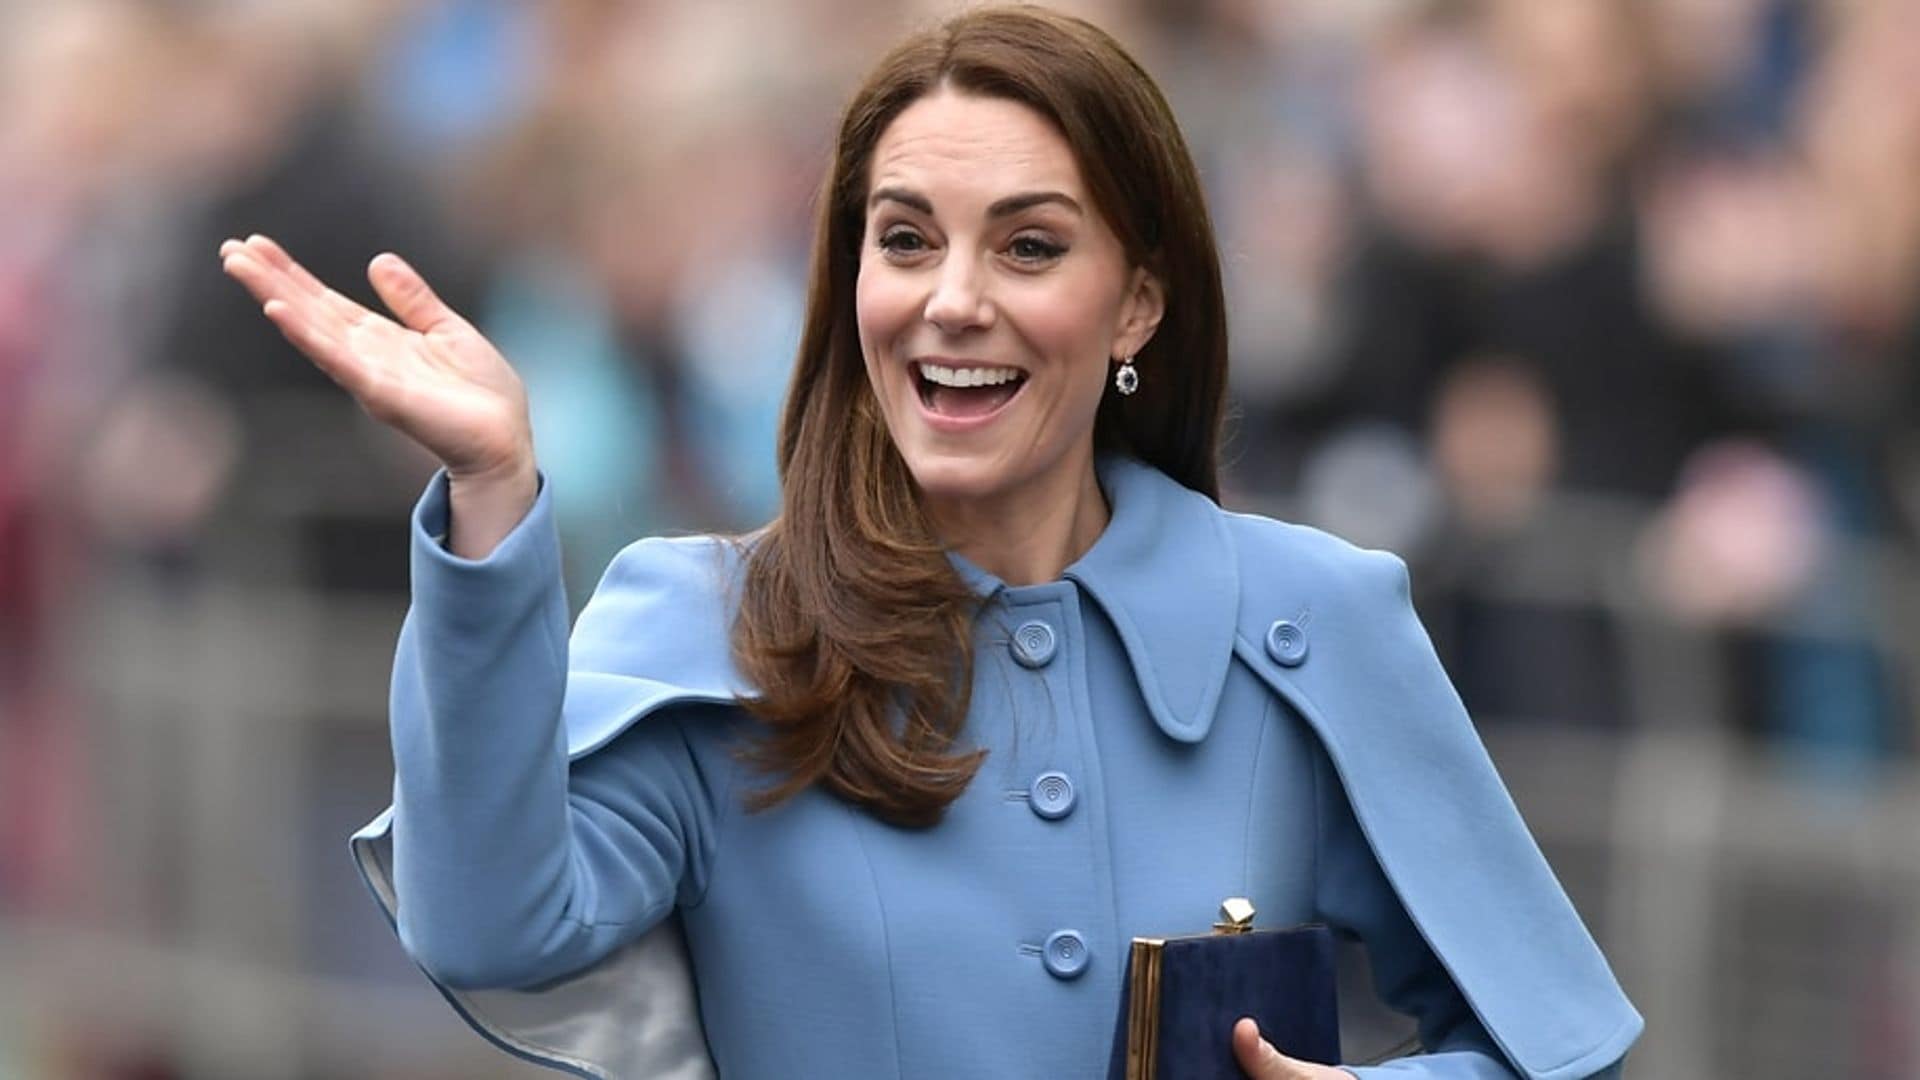 Kate Middleton makes cameo on Blue Peter to launch contest